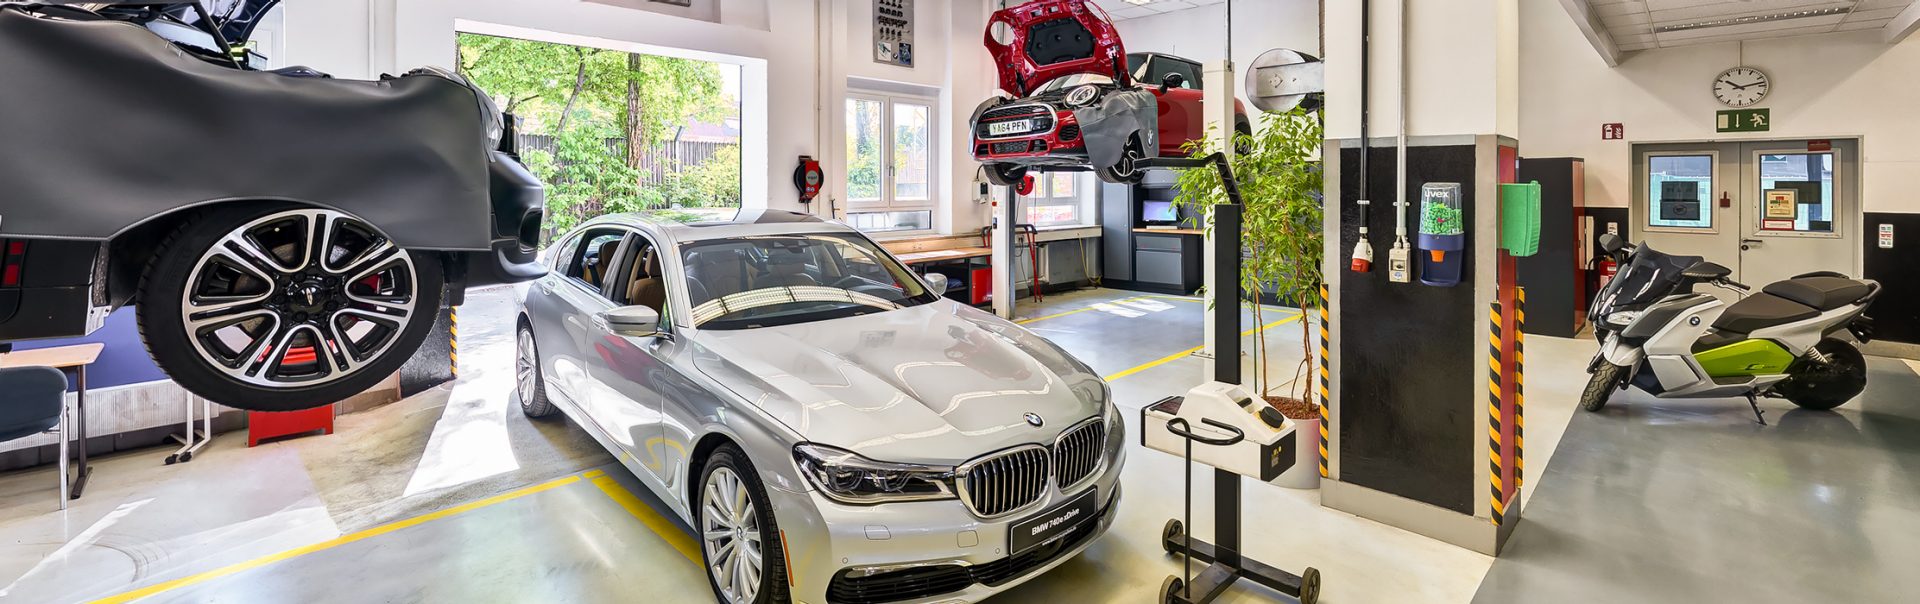 BMW Group apprentice training rooms in Munich